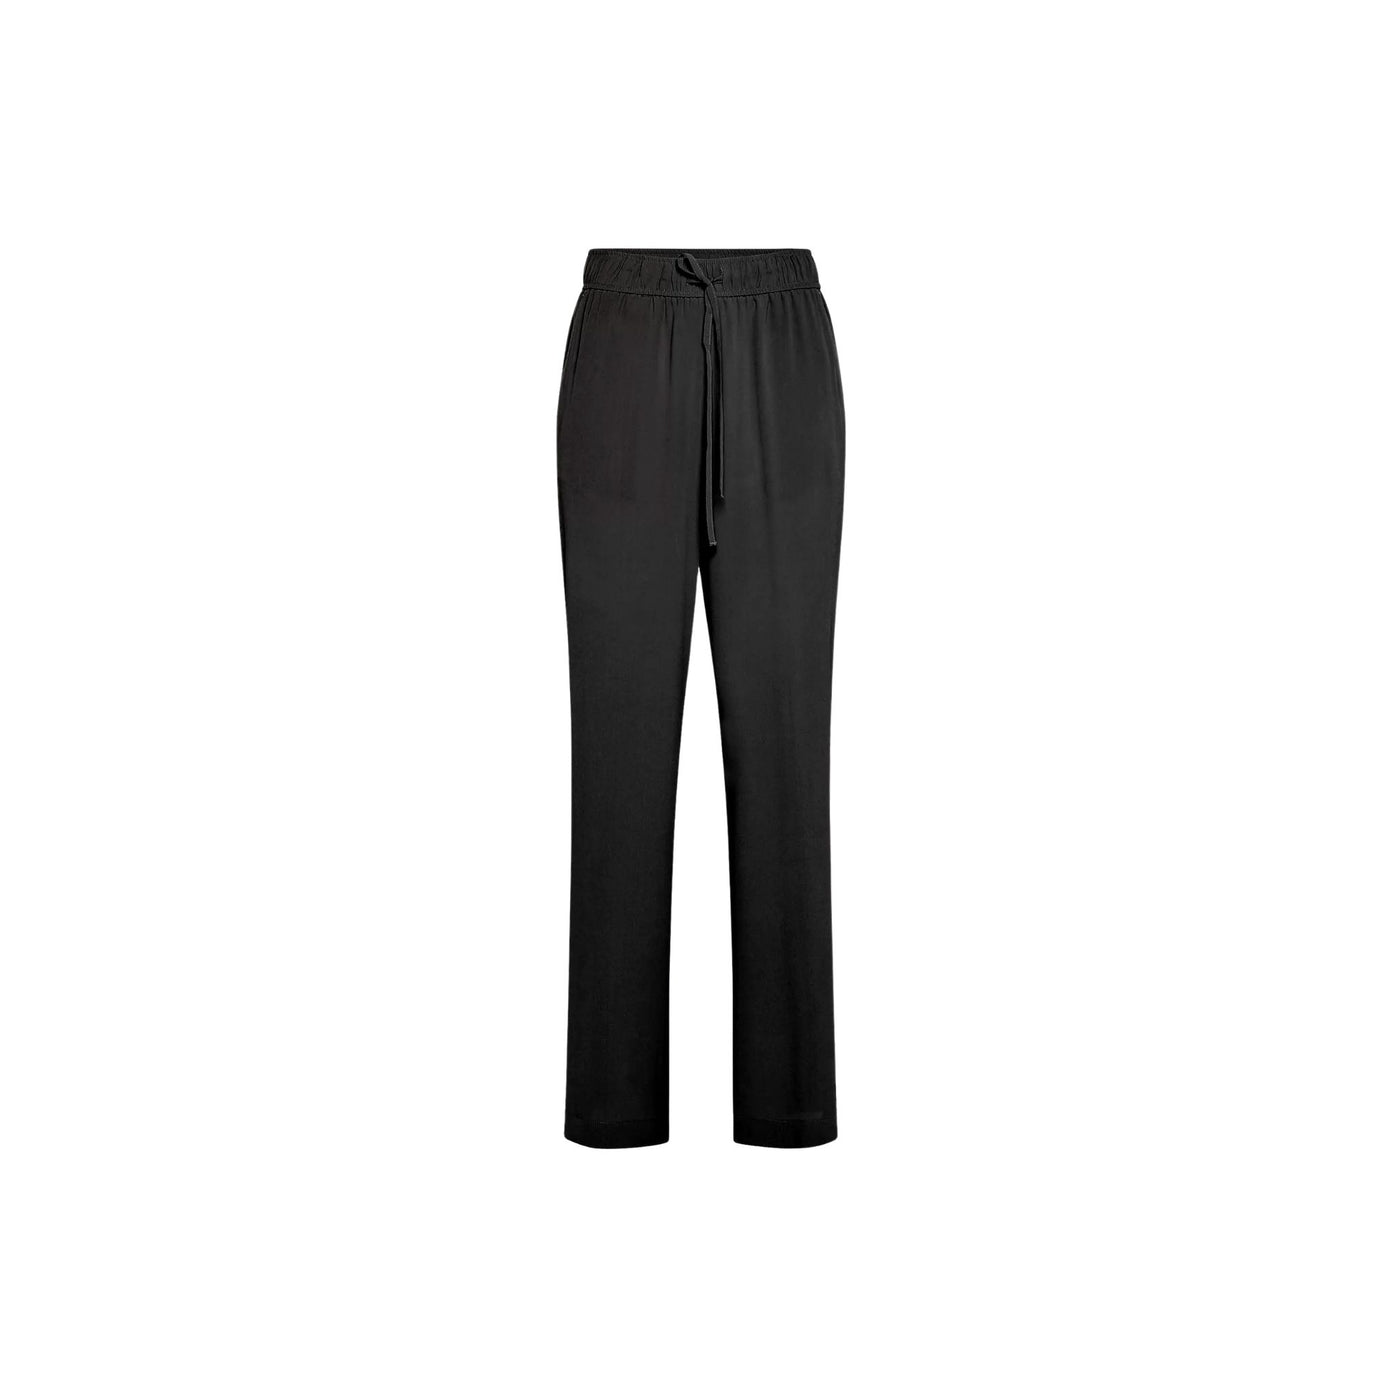 Women's jogging trousers with drawstring